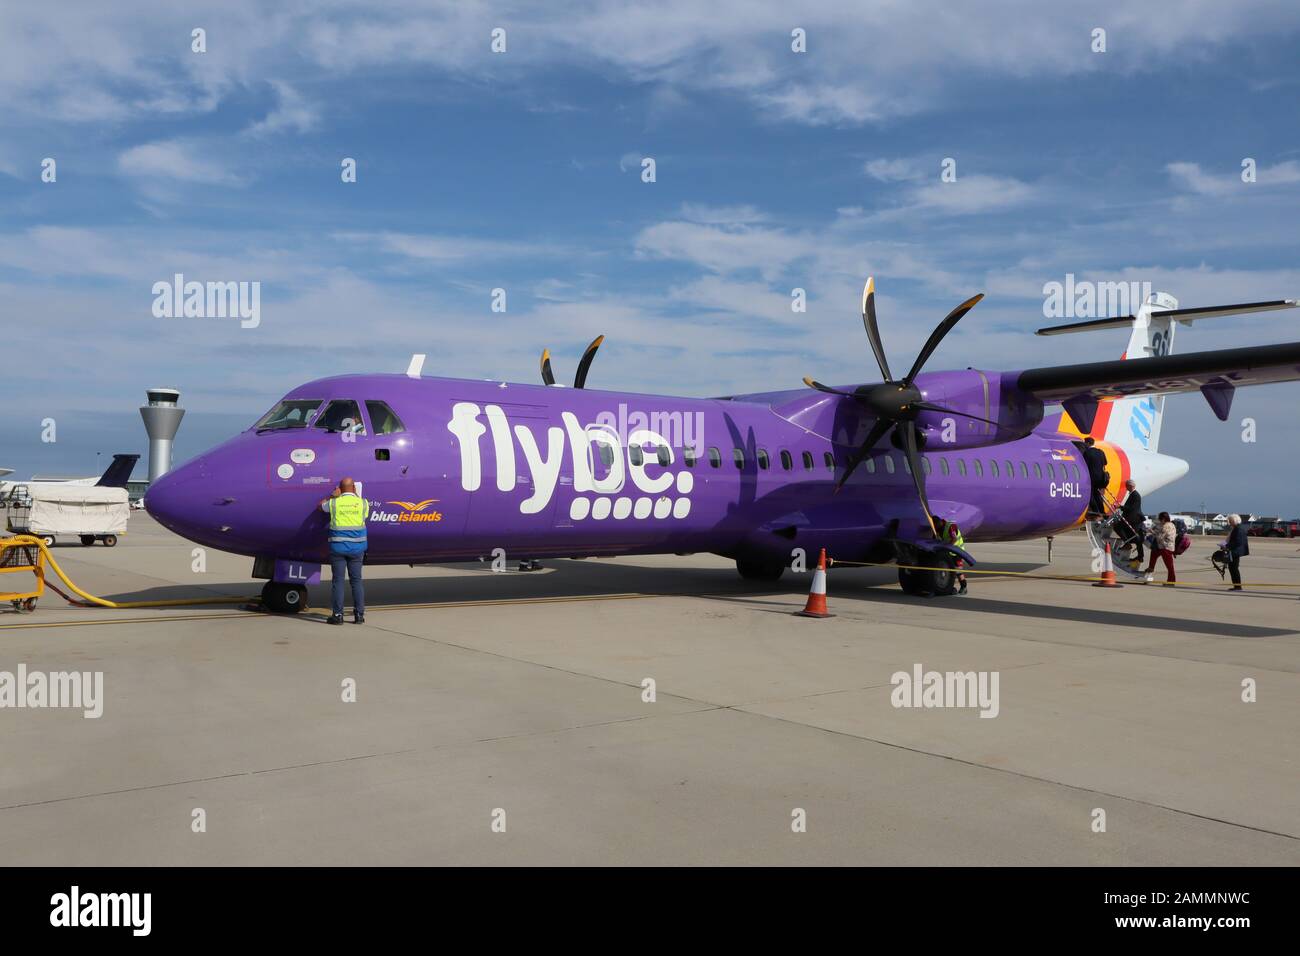 Flybe Britain's biggest regional airline on brink of bankruptcy, Jersey Airport, Channel Islands, UK, 05 August 2019, Photo by Richard Goldschmidt Stock Photo